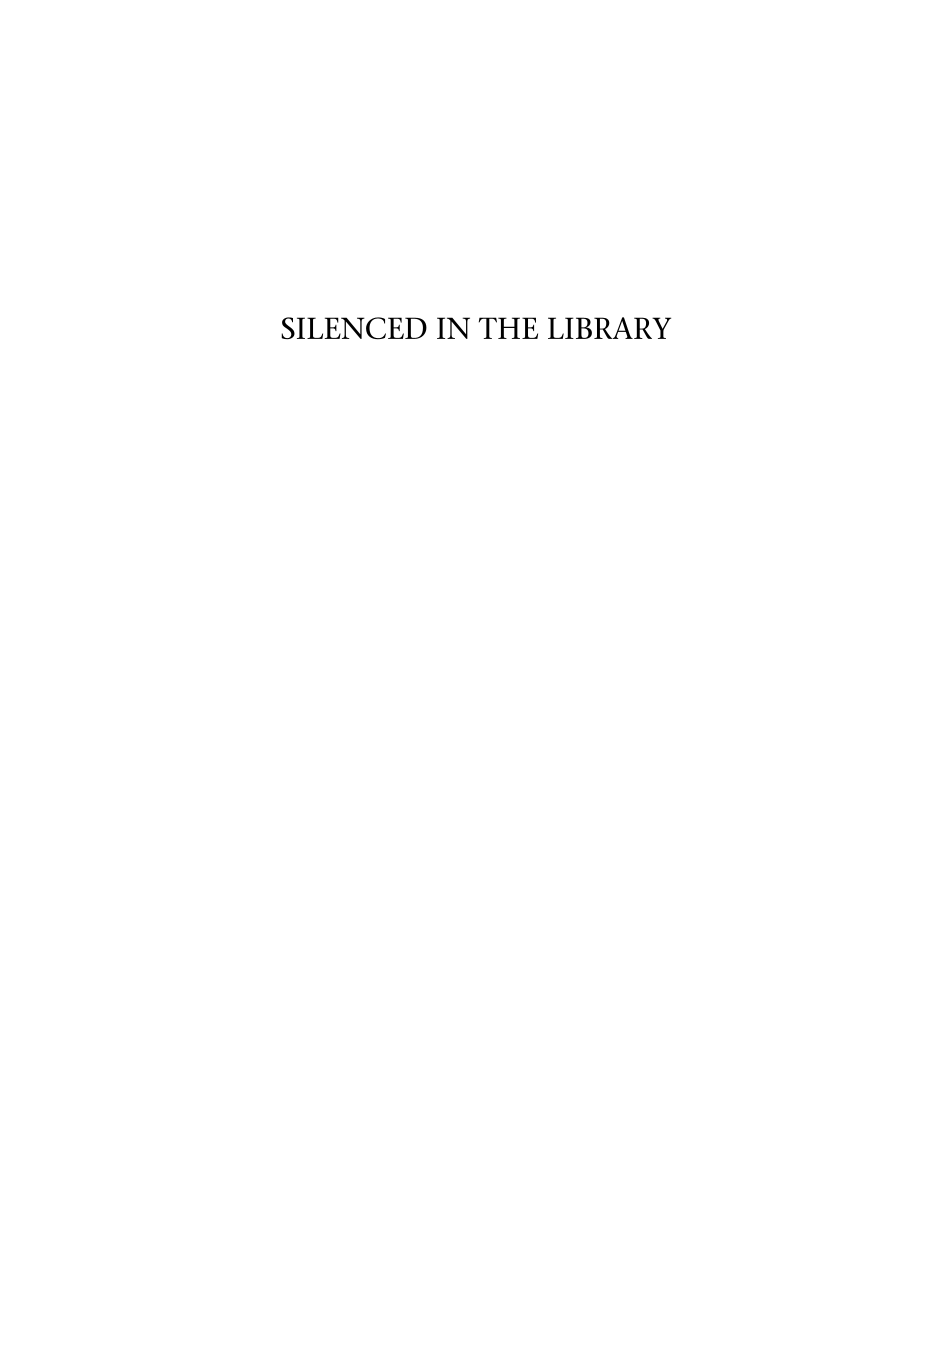 Silenced in the Library: Banned Books in America page i